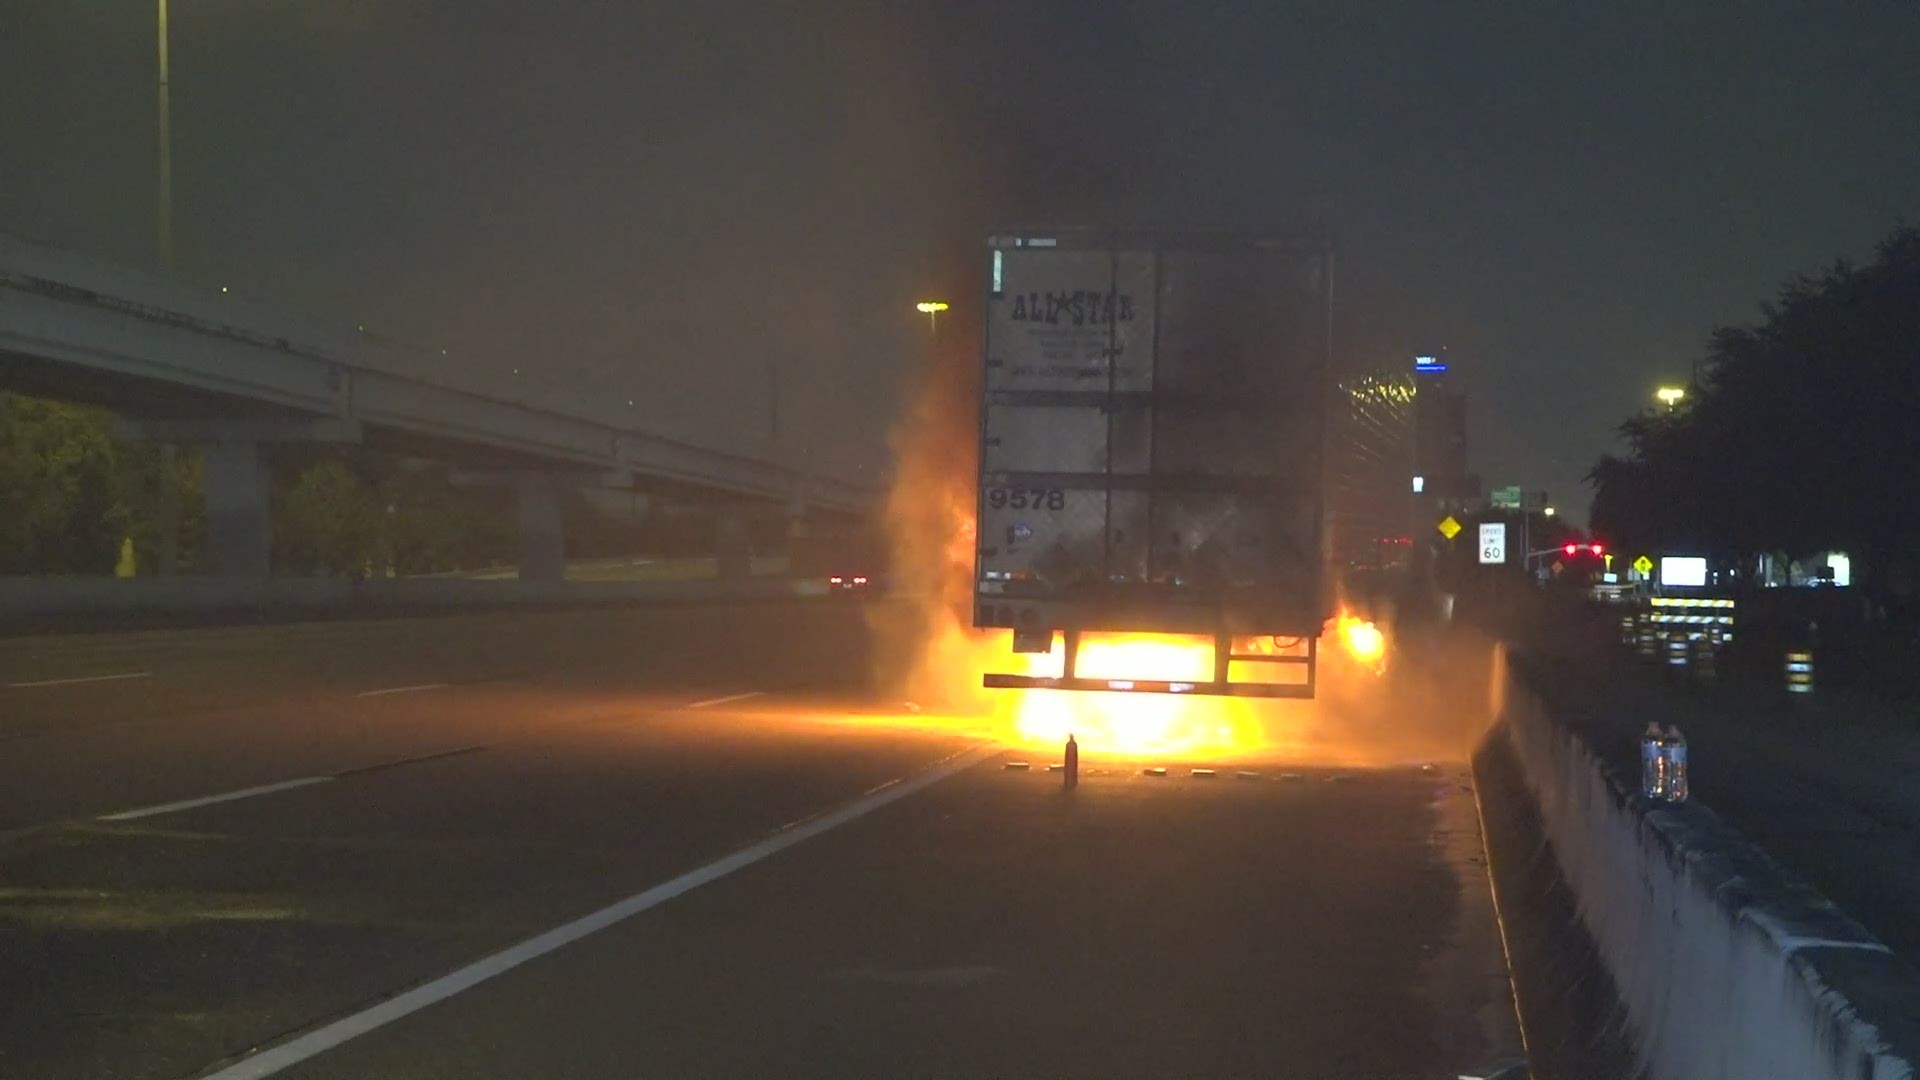 Firefighters work to put out a fire on a truck carrying jalapenos on the southwest freeway early Friday morning.